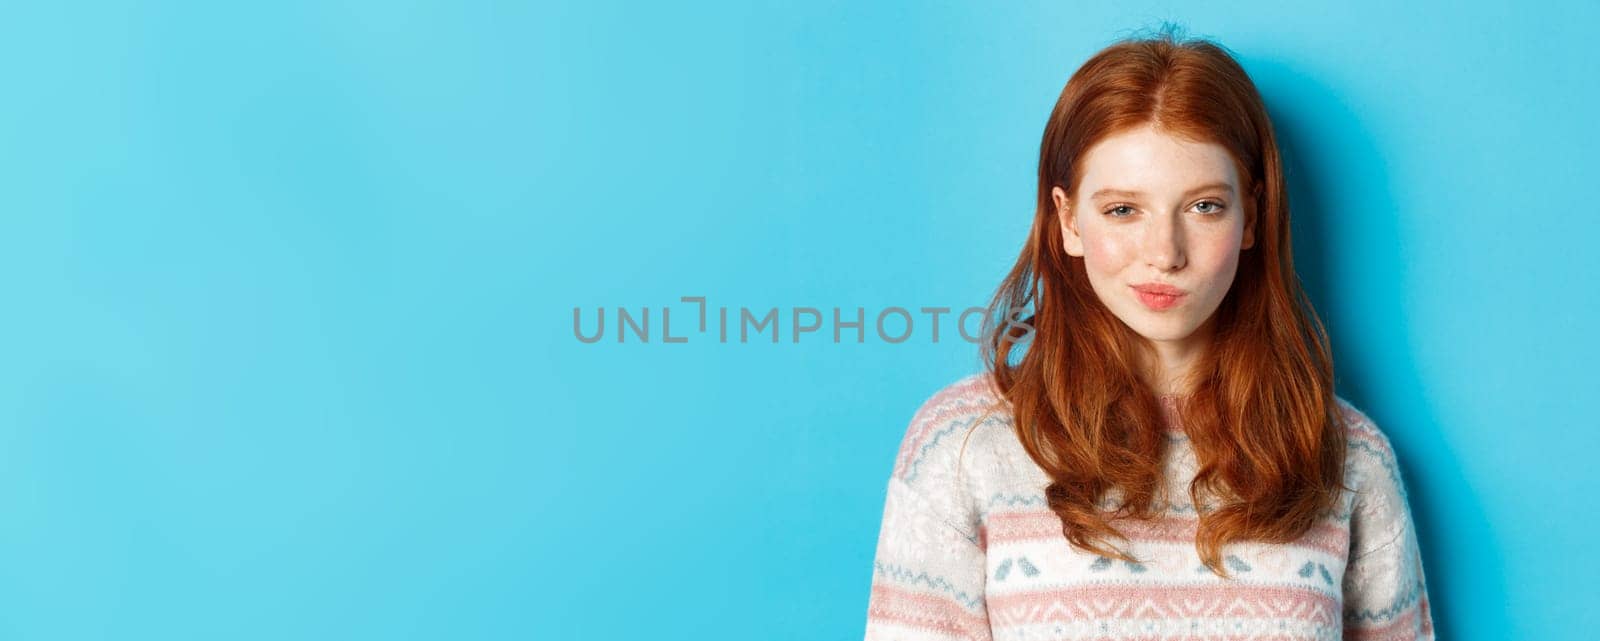 Close-up of redhead cunning girl having an idea, smirk and stare at camera satisfied with plan, standing over blue background.